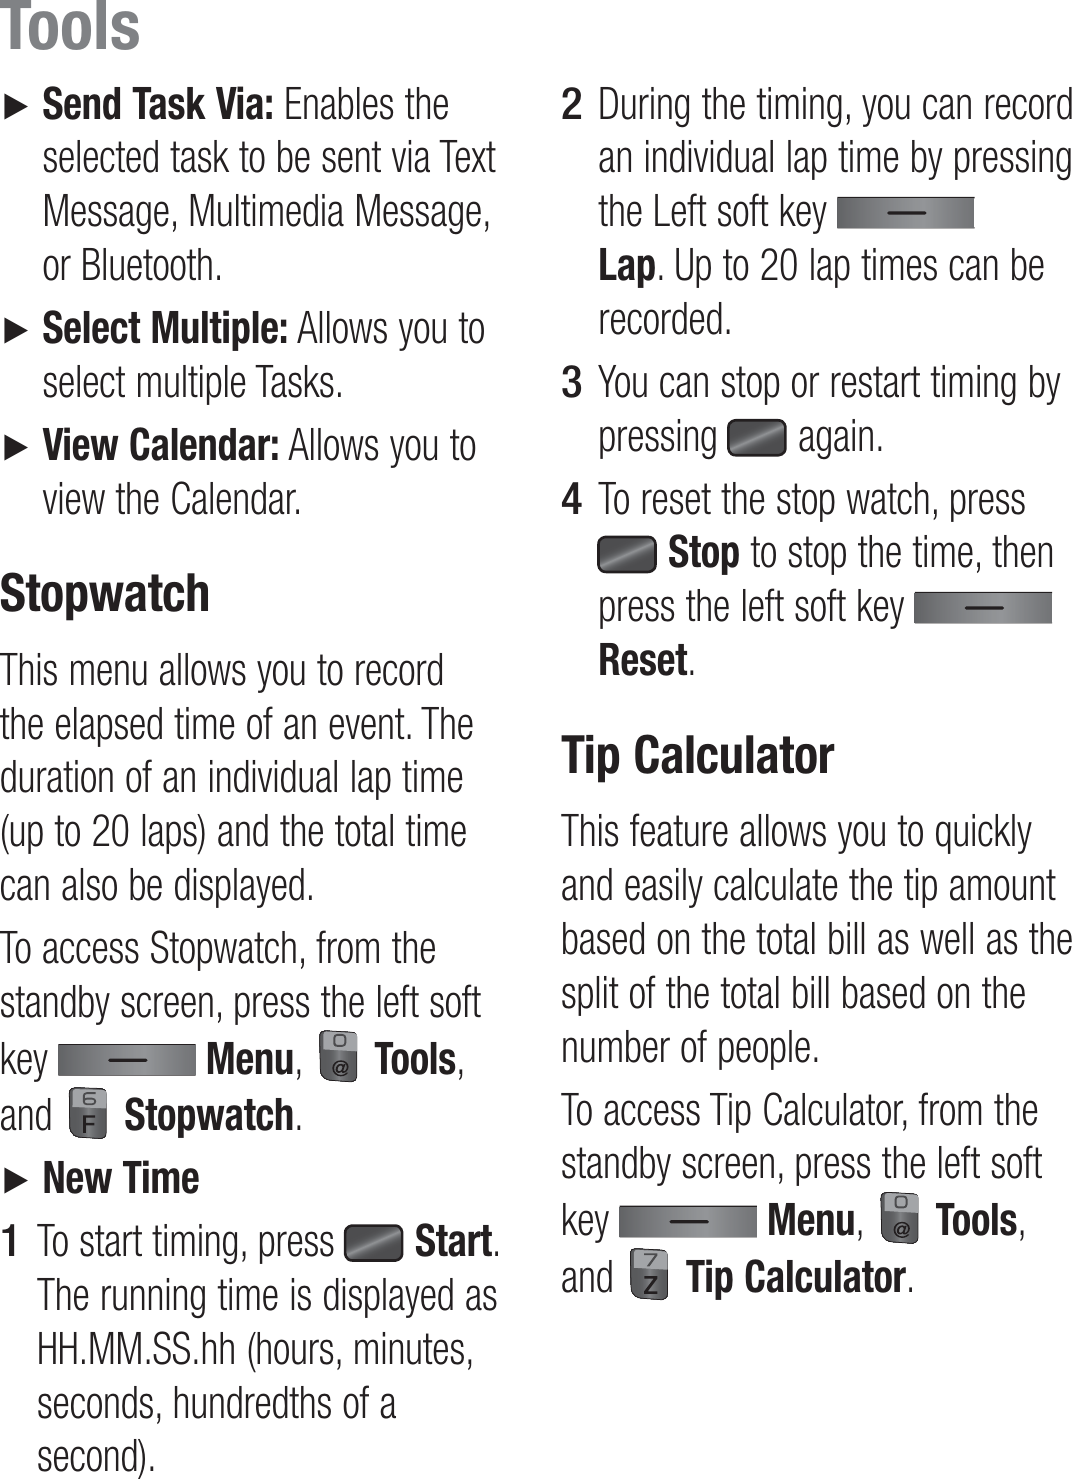 ►   Send Task Via: Enables the selected task to be sent via Text Message, Multimedia Message, or Bluetooth.►   Select Multiple: Allows you to select multiple Tasks.►   View Calendar: Allows you to view the Calendar.StopwatchThis menu allows you to record the elapsed time of an event. The duration of an individual lap time (up to 20 laps) and the total time can also be displayed.To access Stopwatch, from the standby screen, press the left soft key   Menu,   Tools, and   Stopwatch.►   New TimeTo start timing, press   Start. The running time is displayed as HH.MM.SS.hh (hours, minutes, seconds, hundredths of a second).1 During the timing, you can record an individual lap time by pressing the Left soft key   Lap. Up to 20 lap times can be recorded.You can stop or restart timing by pressing   again.To reset the stop watch, press  Stop to stop the time, then press the left soft key   Reset.Tip CalculatorThis feature allows you to quickly and easily calculate the tip amount based on the total bill as well as the split of the total bill based on the number of people.To access Tip Calculator, from the standby screen, press the left soft key   Menu,   Tools, and   Tip Calculator.2 3 4 Tools